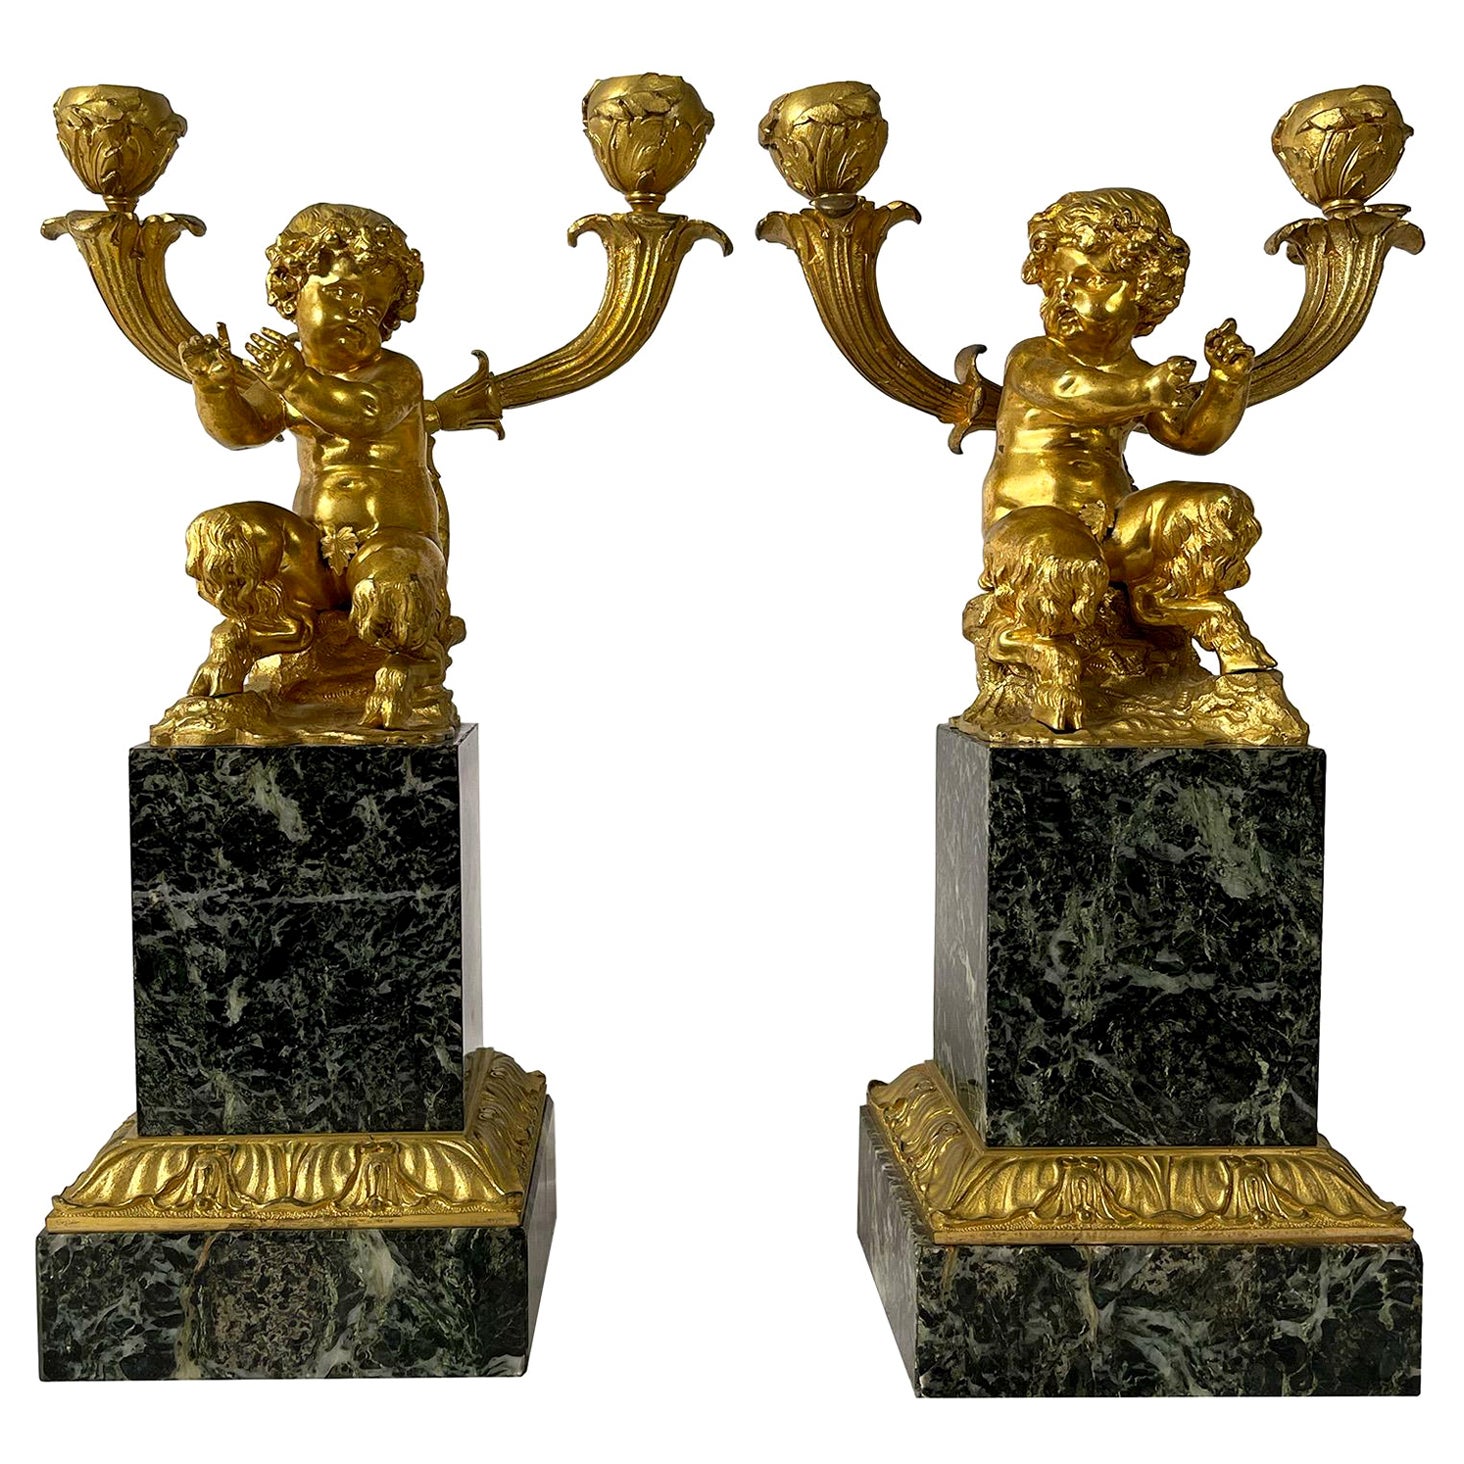 Pair of Early 19th Century Marble & Gilt Bronze Figural Candelabras For Sale